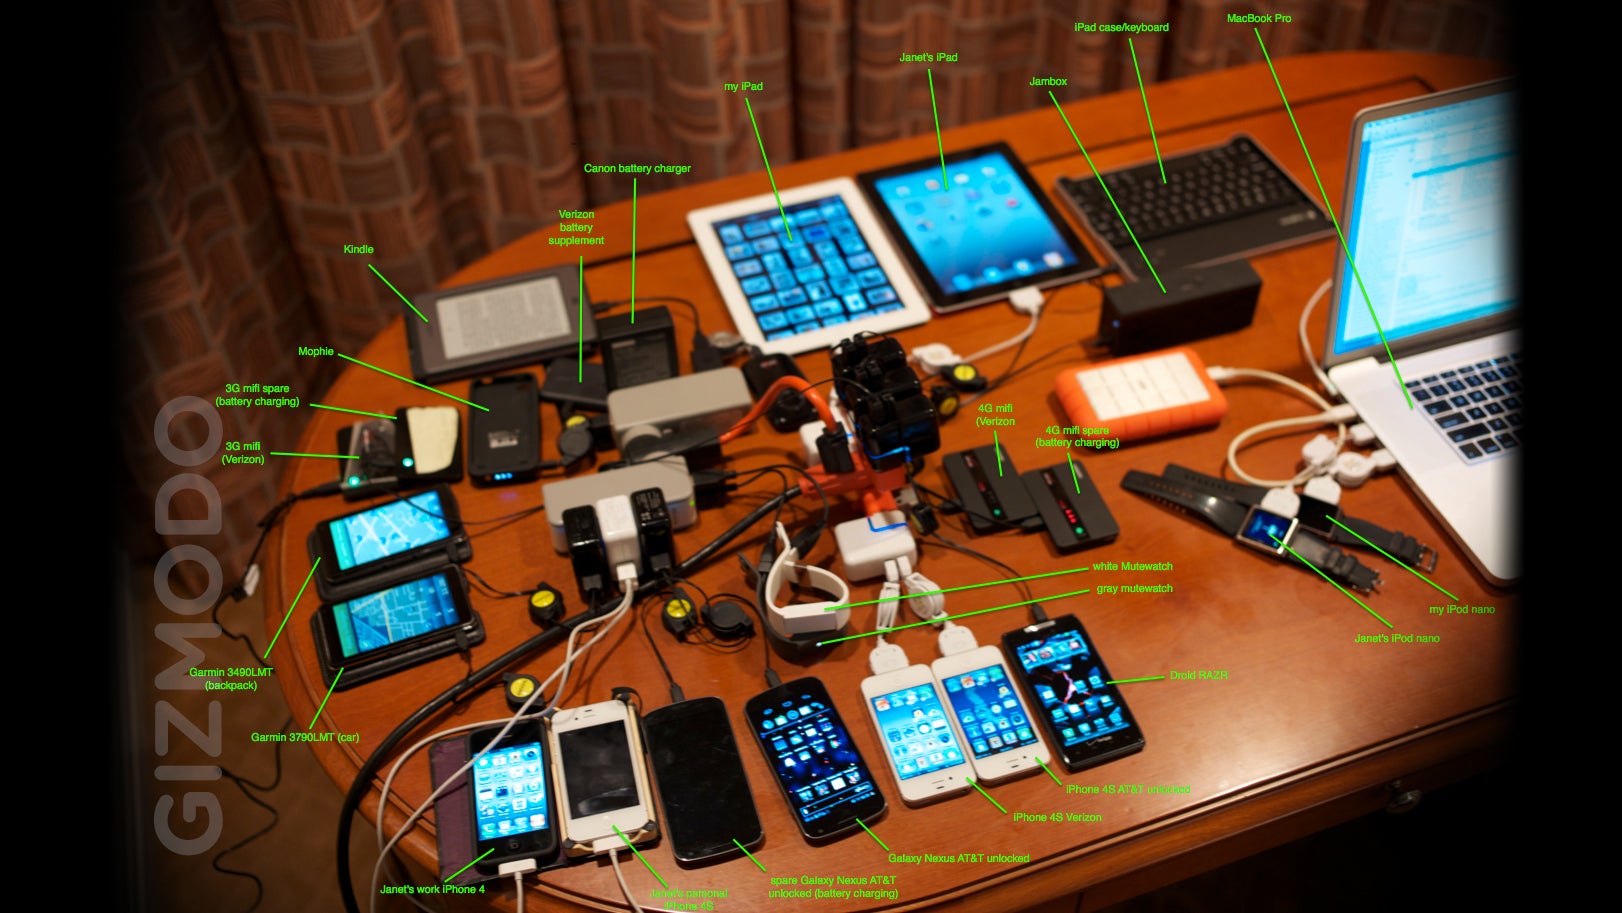 Woz: Unpacked - Woz shows what’s in his bag – puts everyone’s mobile device collection to shame